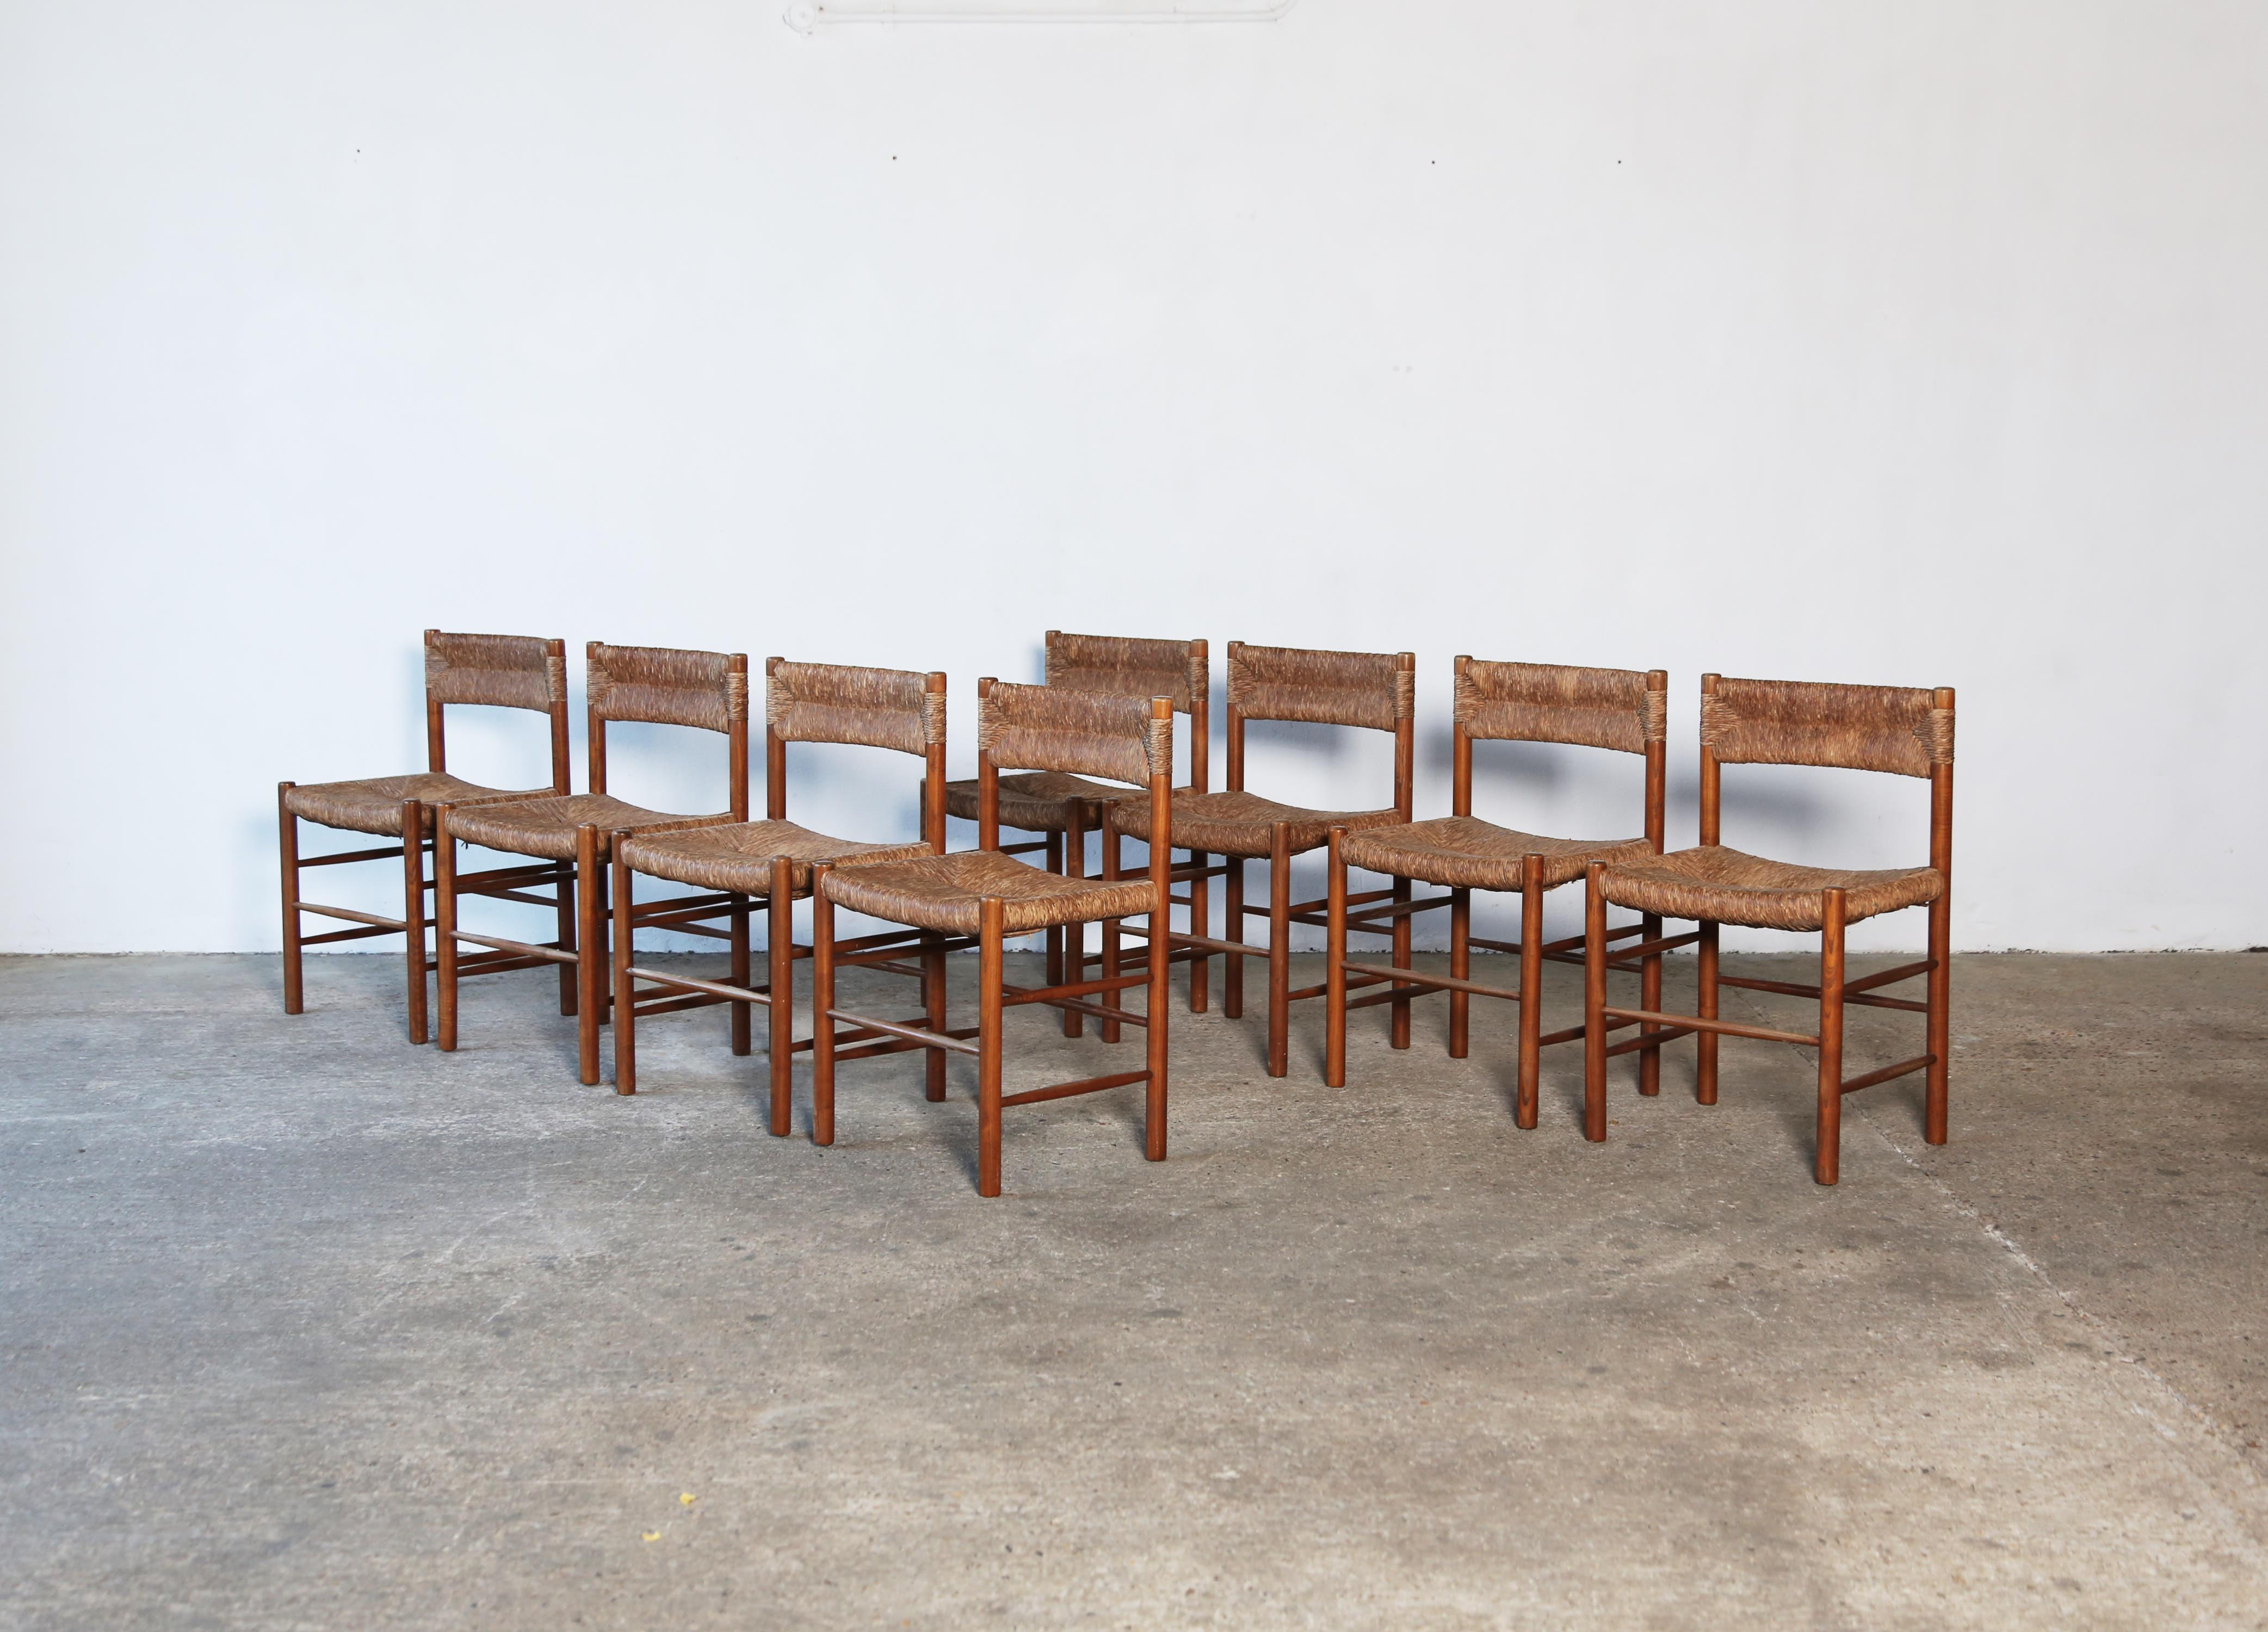 A rare set of eight original Charlotte Perriand / Robert Sentou Dordogne chairs, France, 1960s. Original rush seats and backs in good condition with superb patina.  Fast shipping worldwide.
